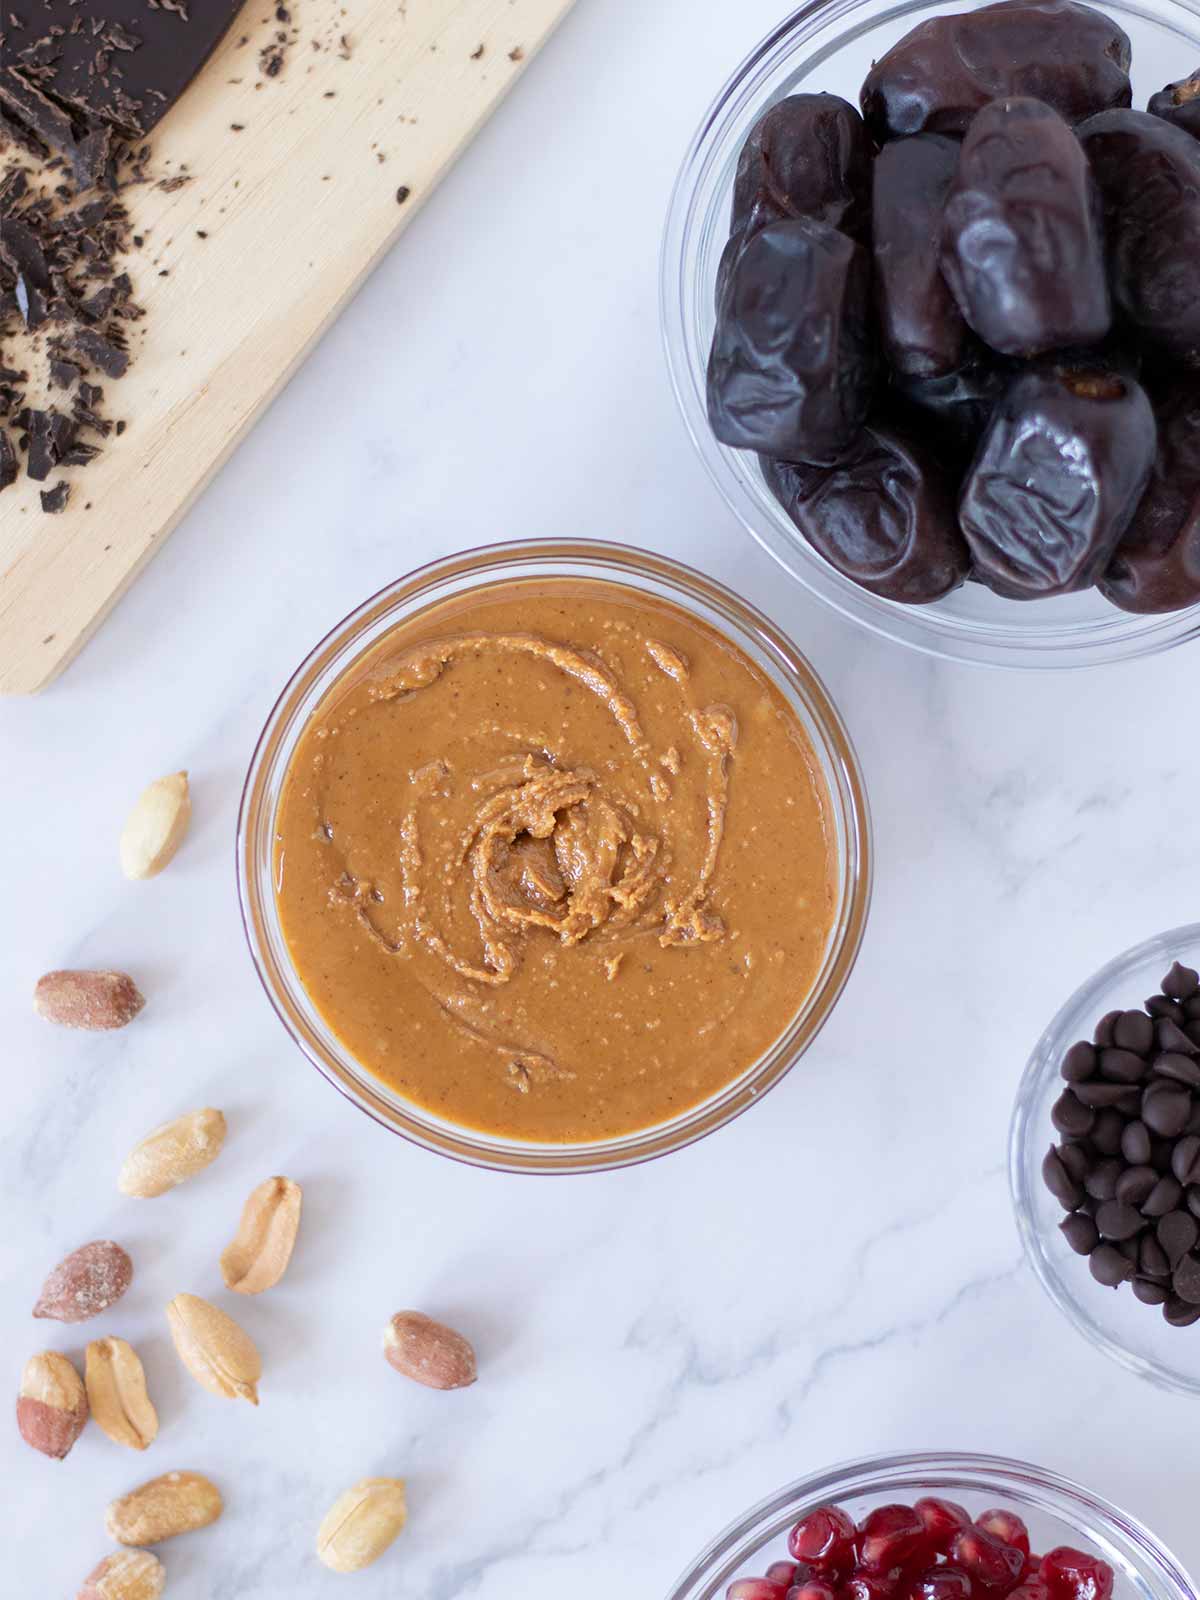 Simple plant-based ingredients for making refined sugar free dessert: Mazafati dates, creamy peanut butter, roasted peanuts, dark chocolate, chocolate chips, and fresh pomegranate arils